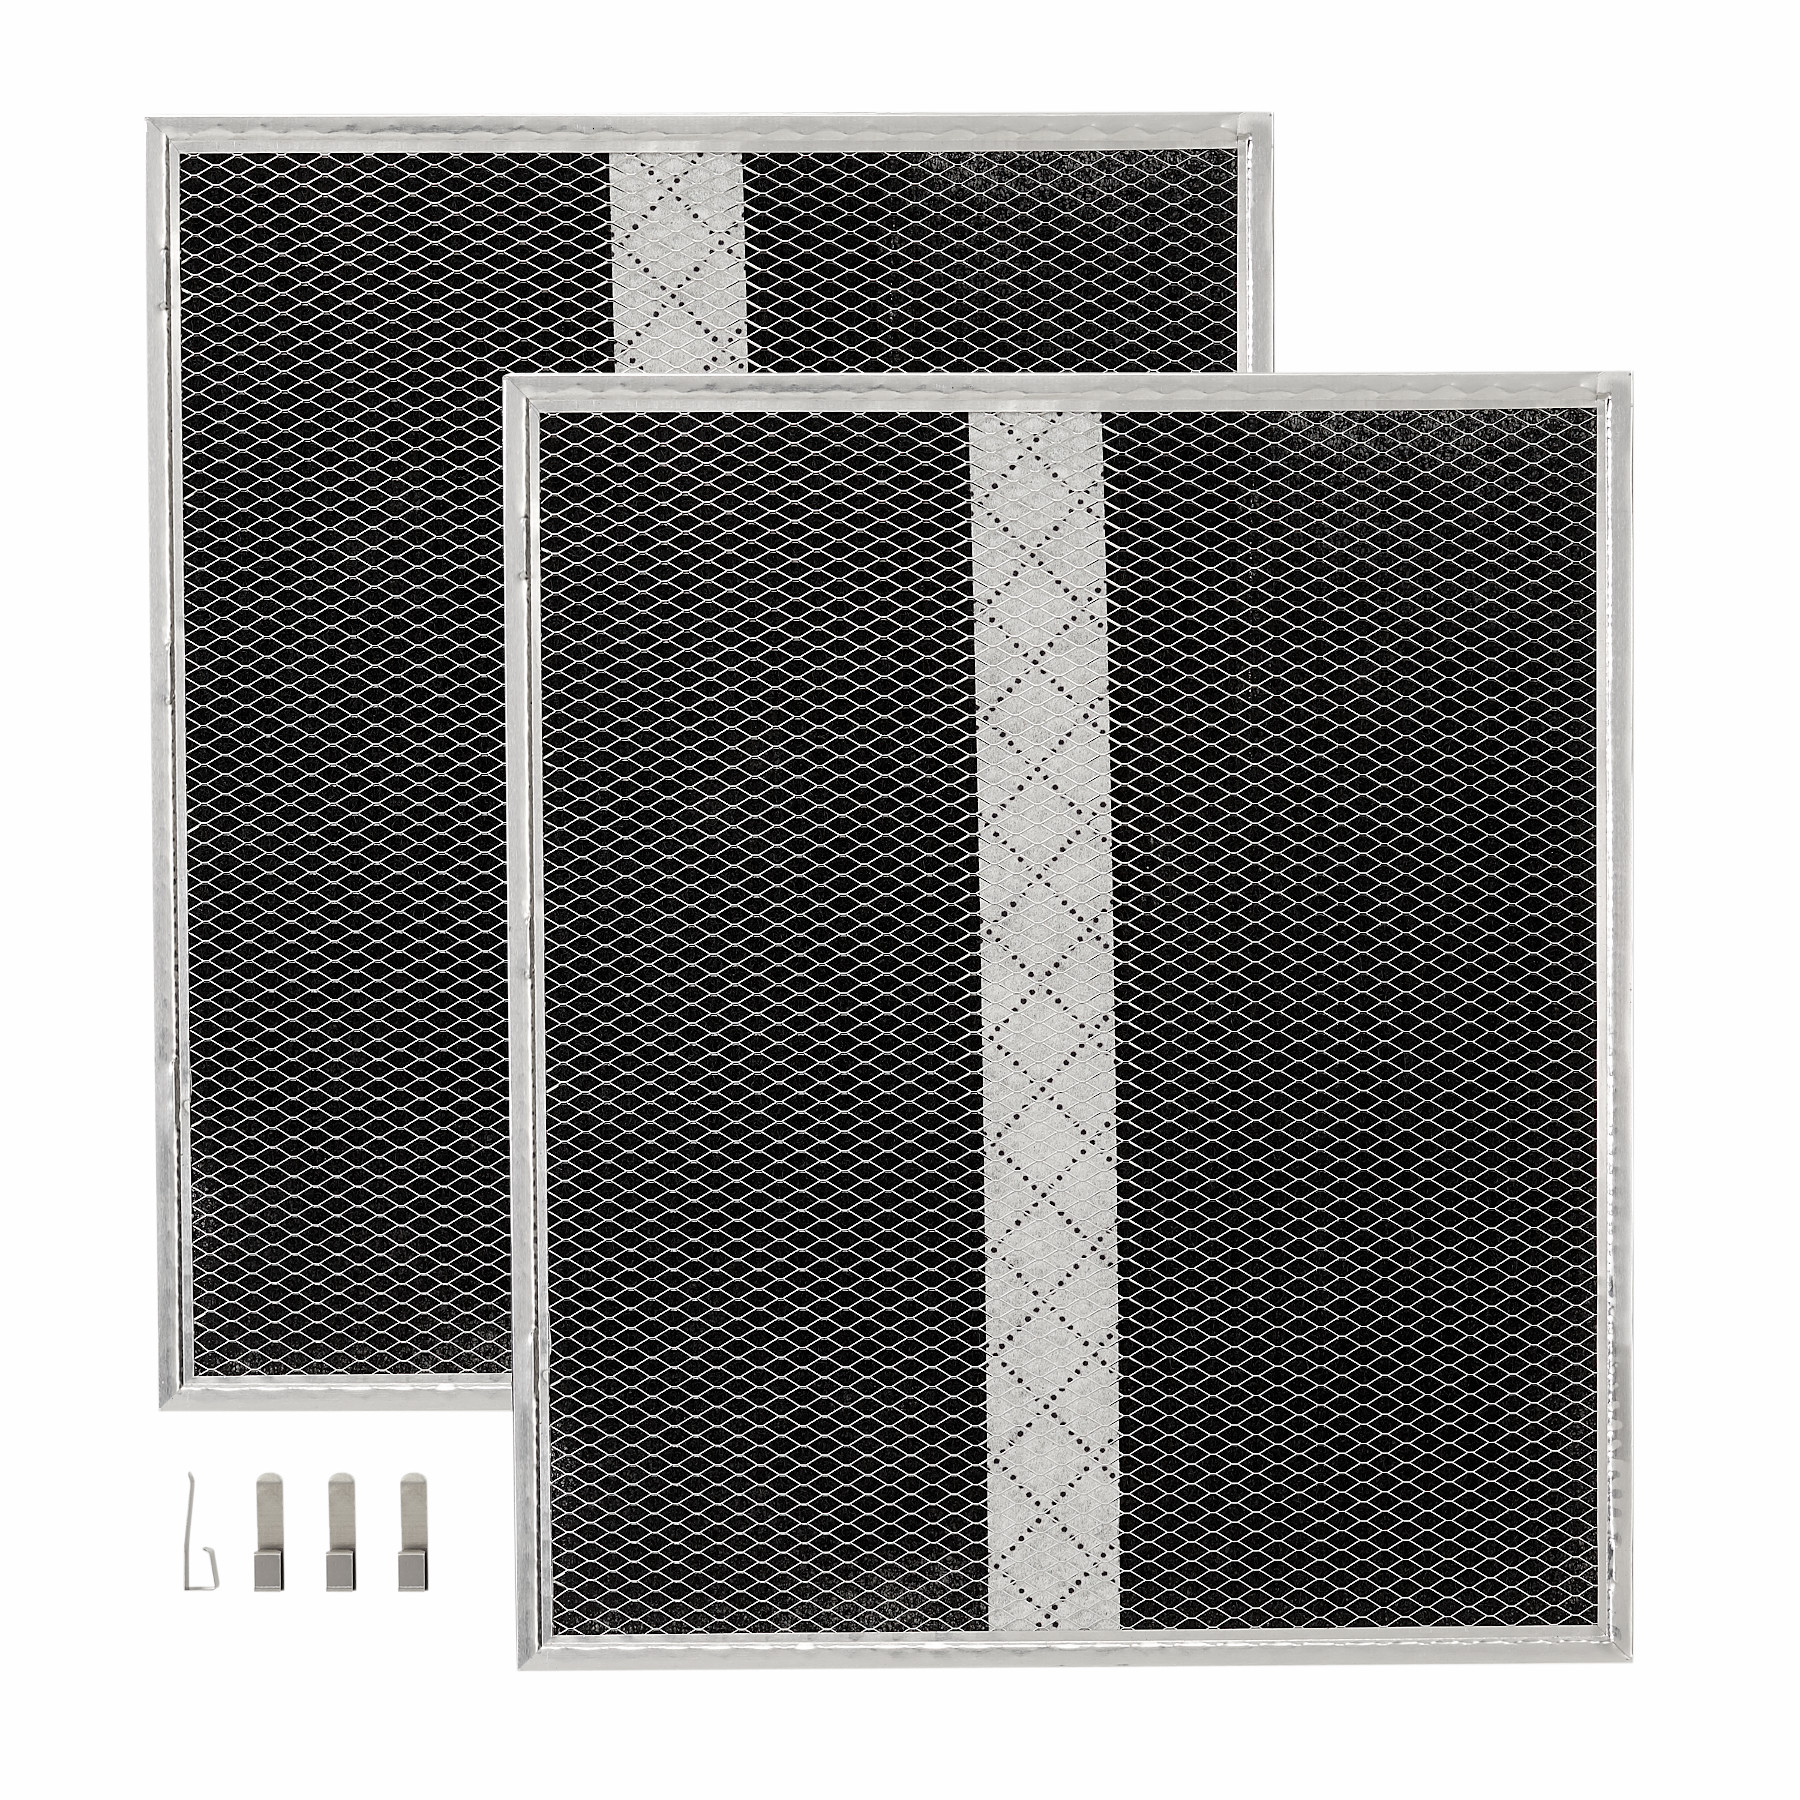 Type Xd Non-Ducted Replacement Charcoal Filter 14.624” x 15.883” x 0.500”